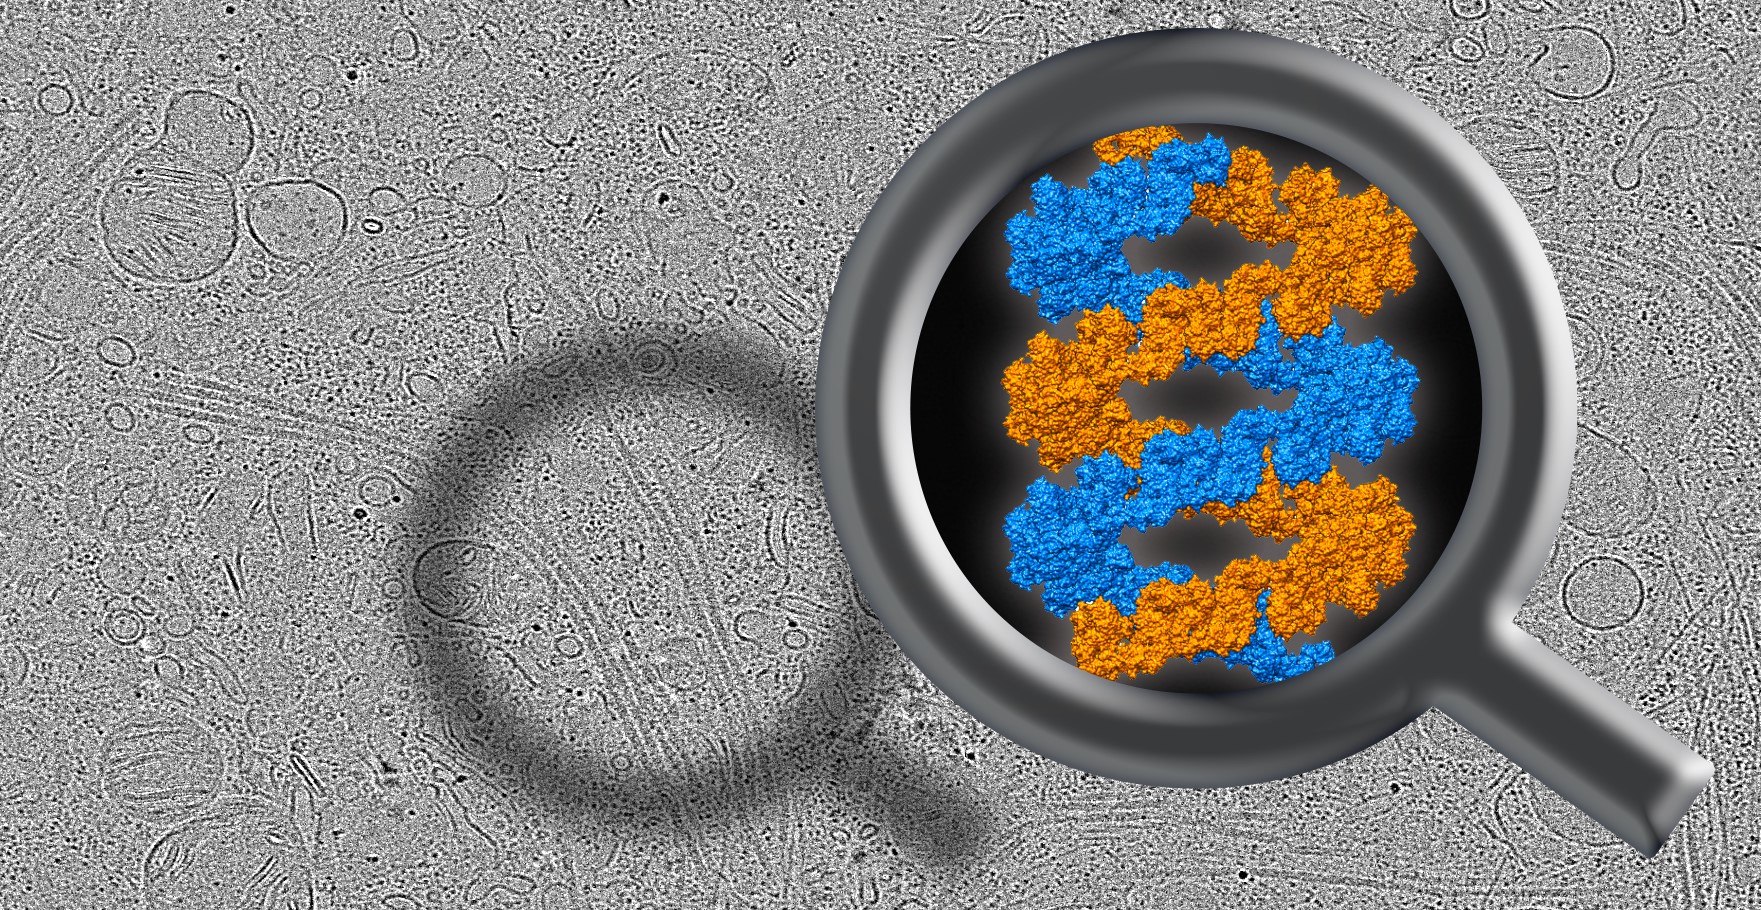 Image of magnifying glass showing blue and orange.